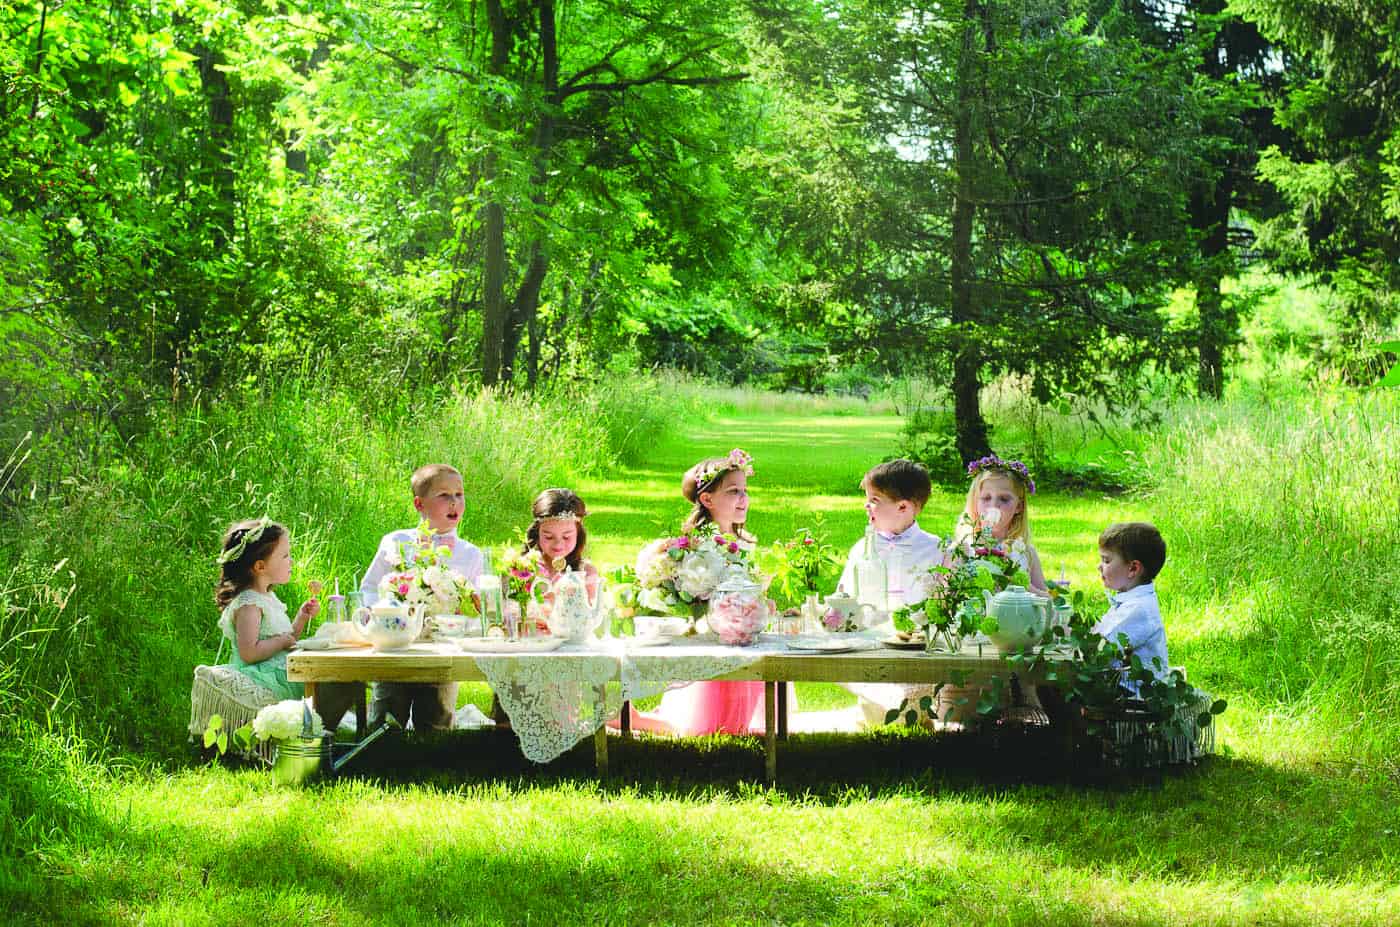 Should You Have a Kids Table at Your Wedding?